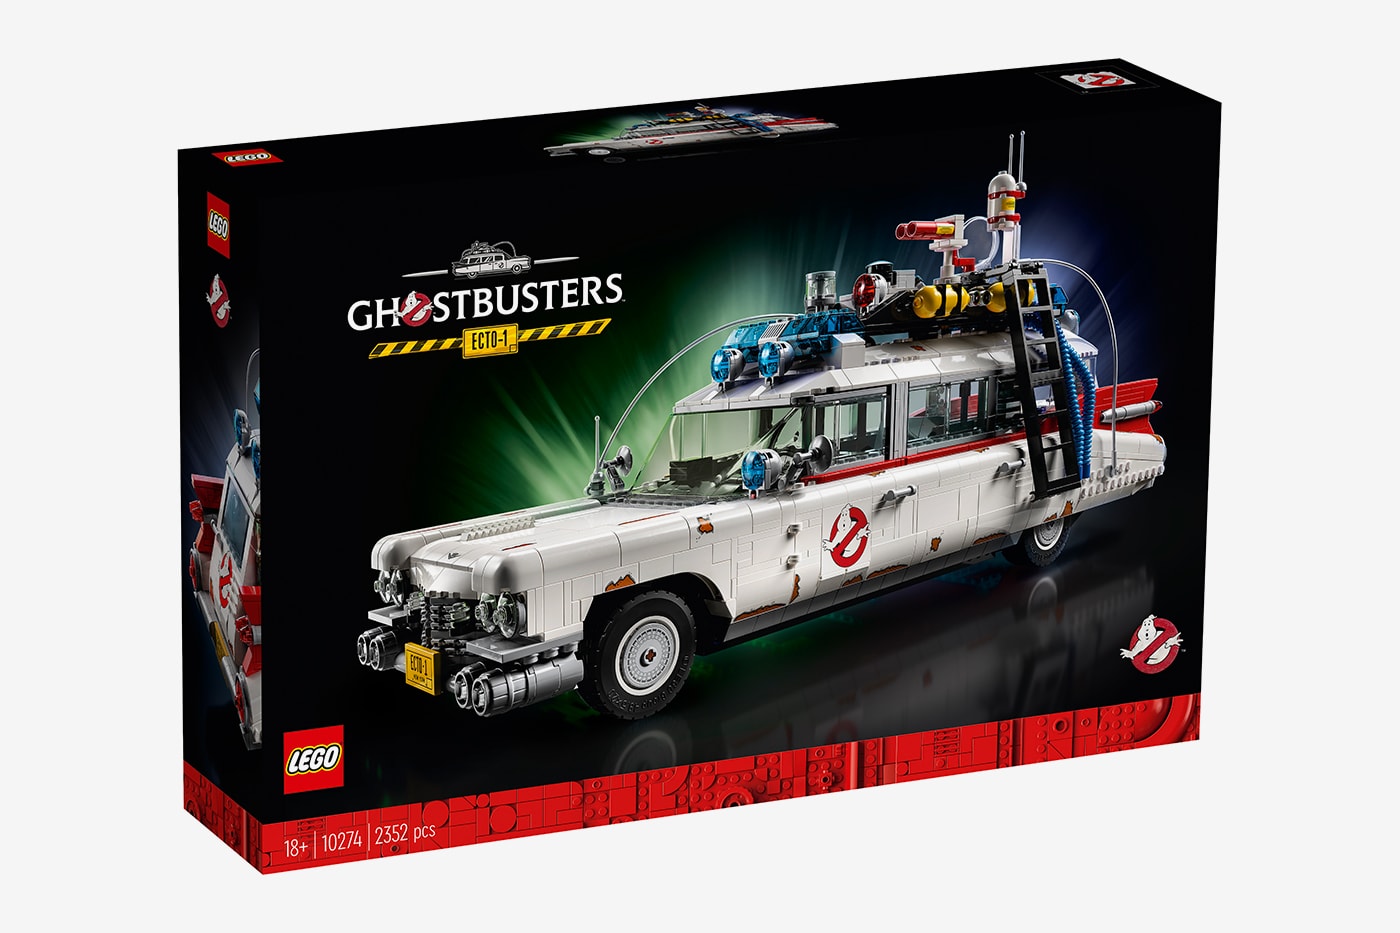 LEGO 2352 Piece Ghostbusters ECTO1 ectomobile movie franchise 1959 Cadillac Miller Meteor ambulance 6 14 curved windshield five module steering wheel toys figures Kit Buy Price info